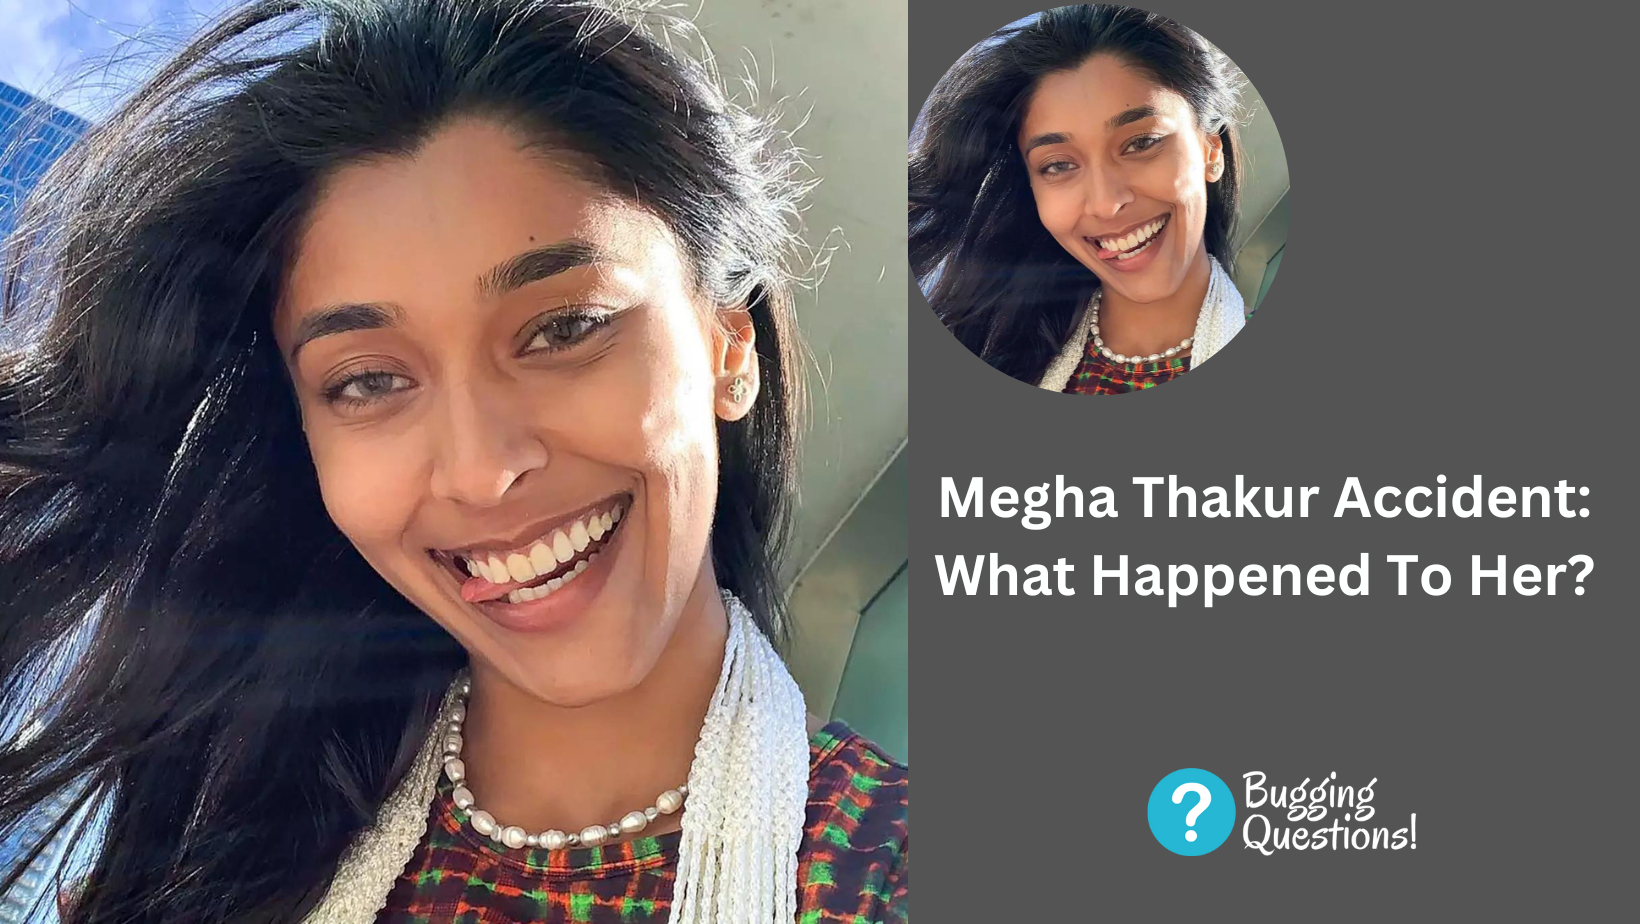 Megha Thakur Accident: What Happened To Her?